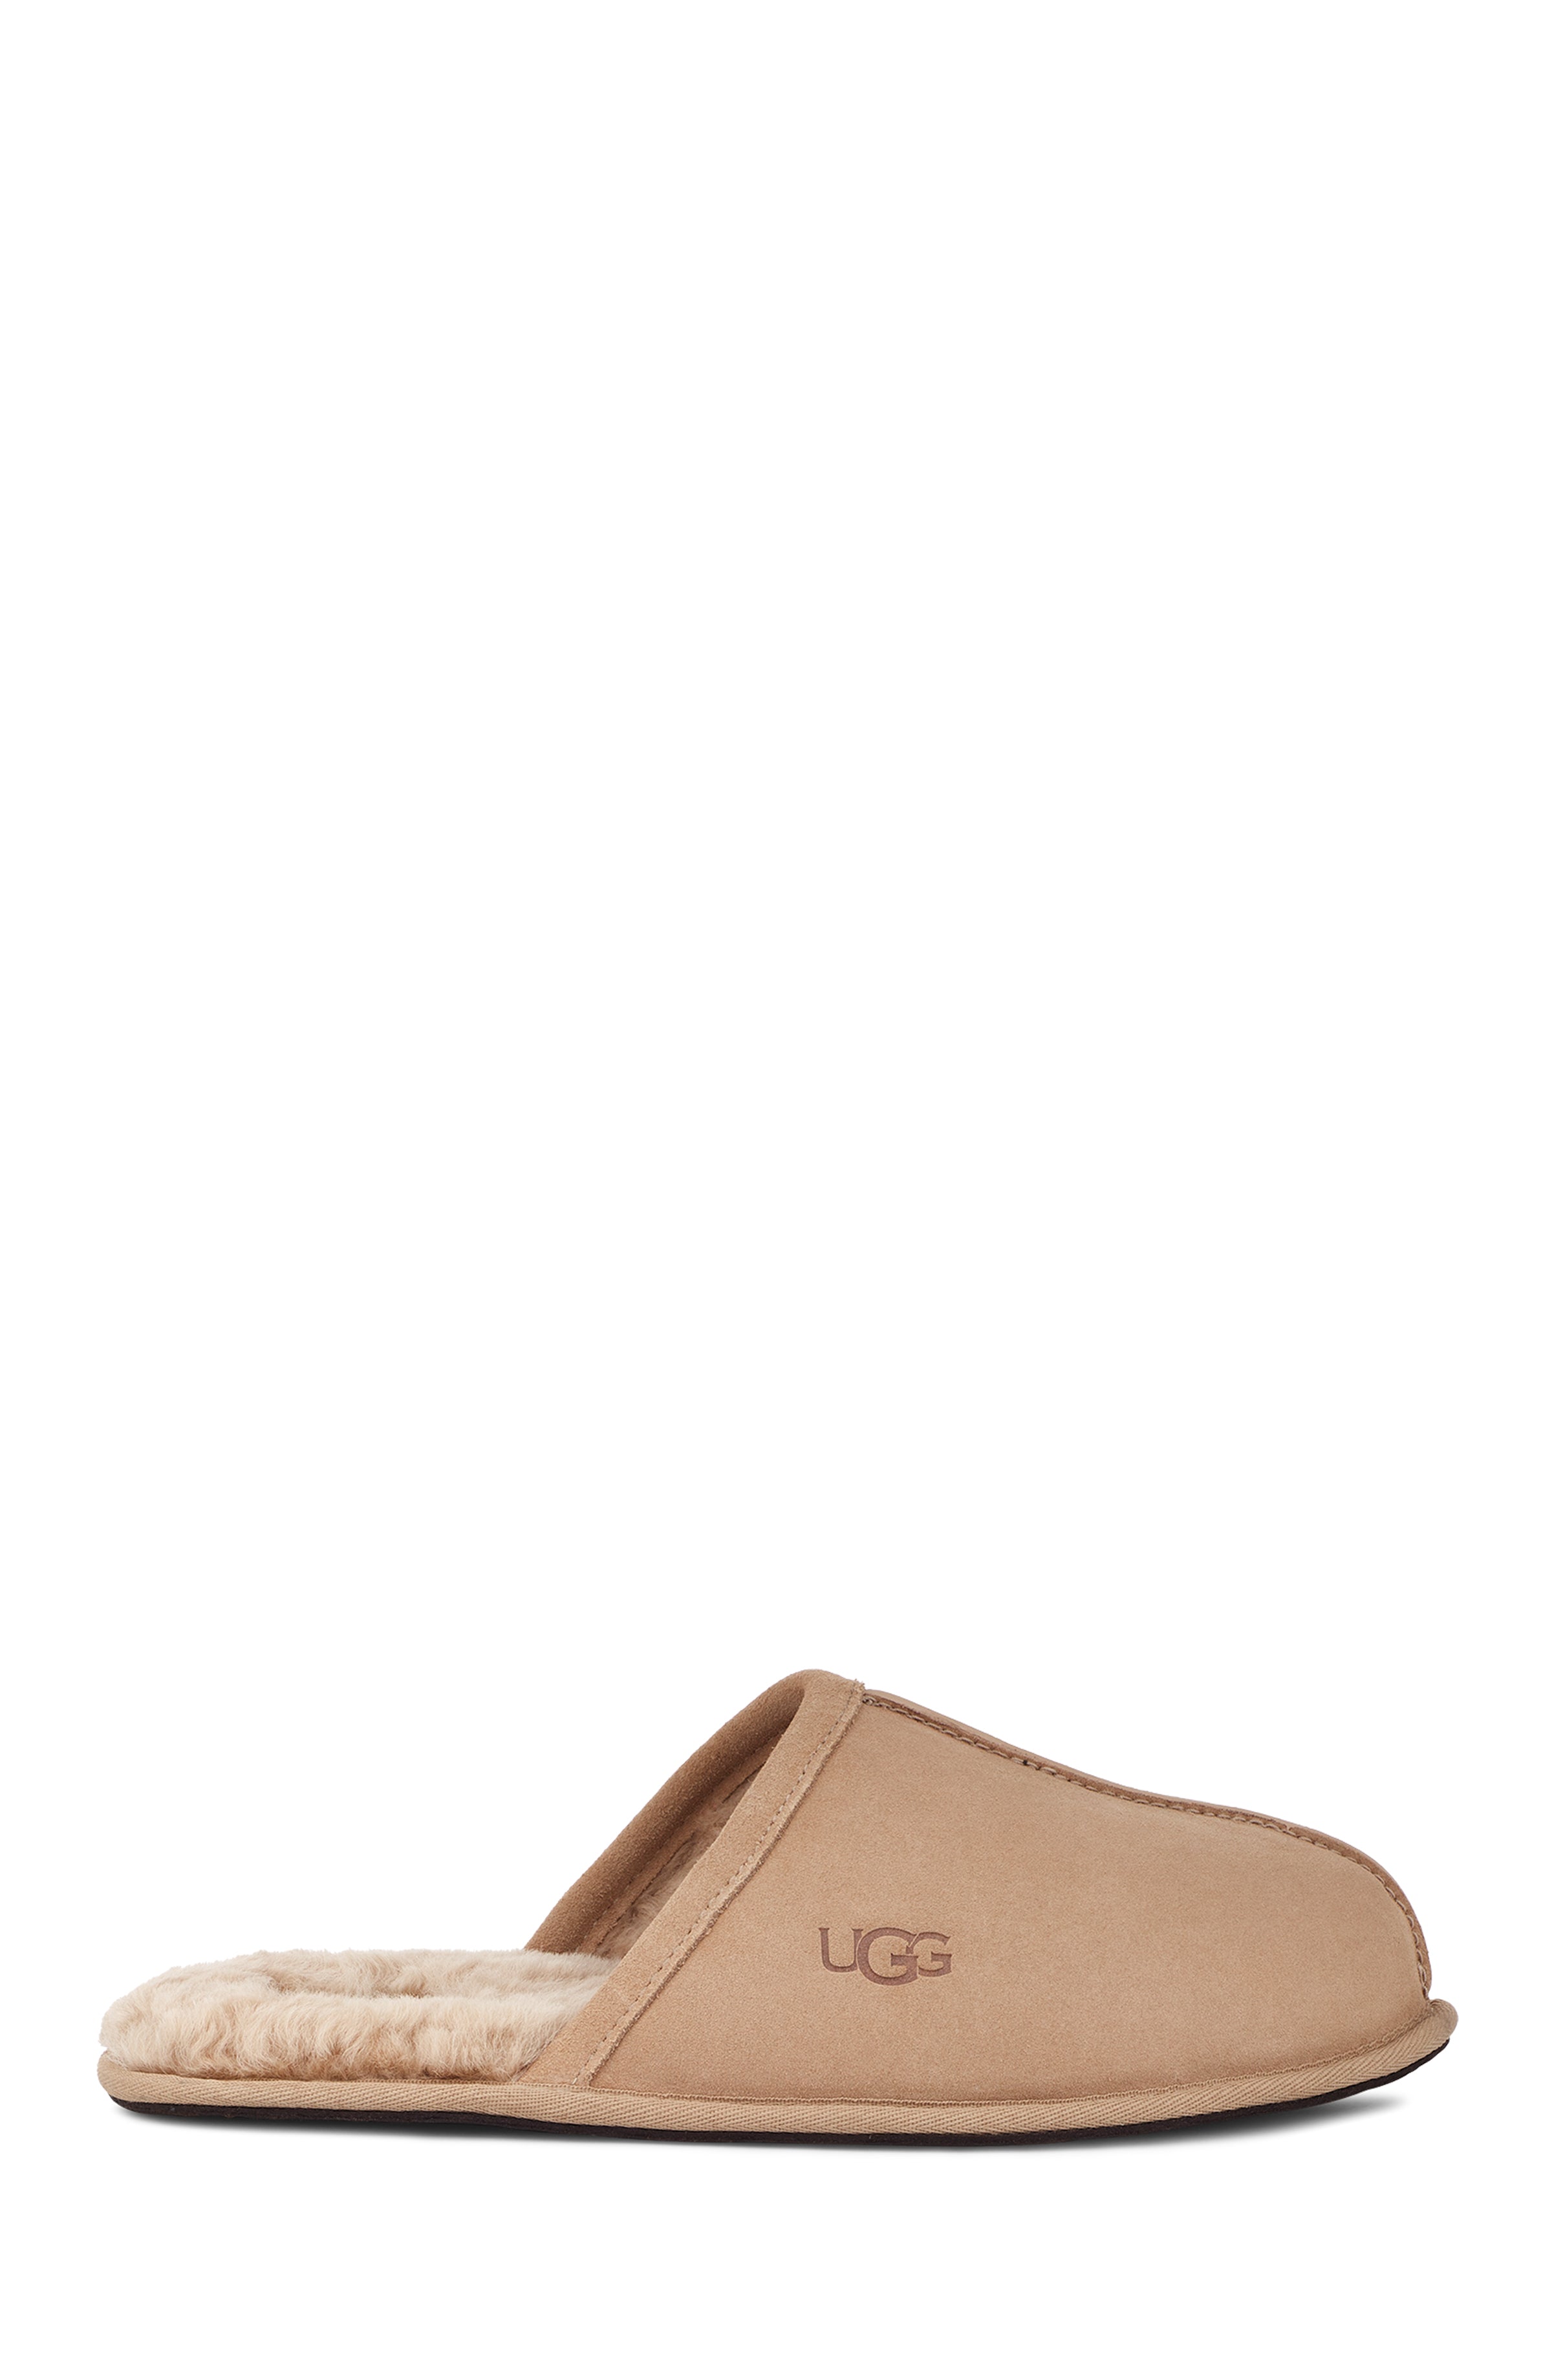 Sample UGG Scuff Slippers Sand 8 